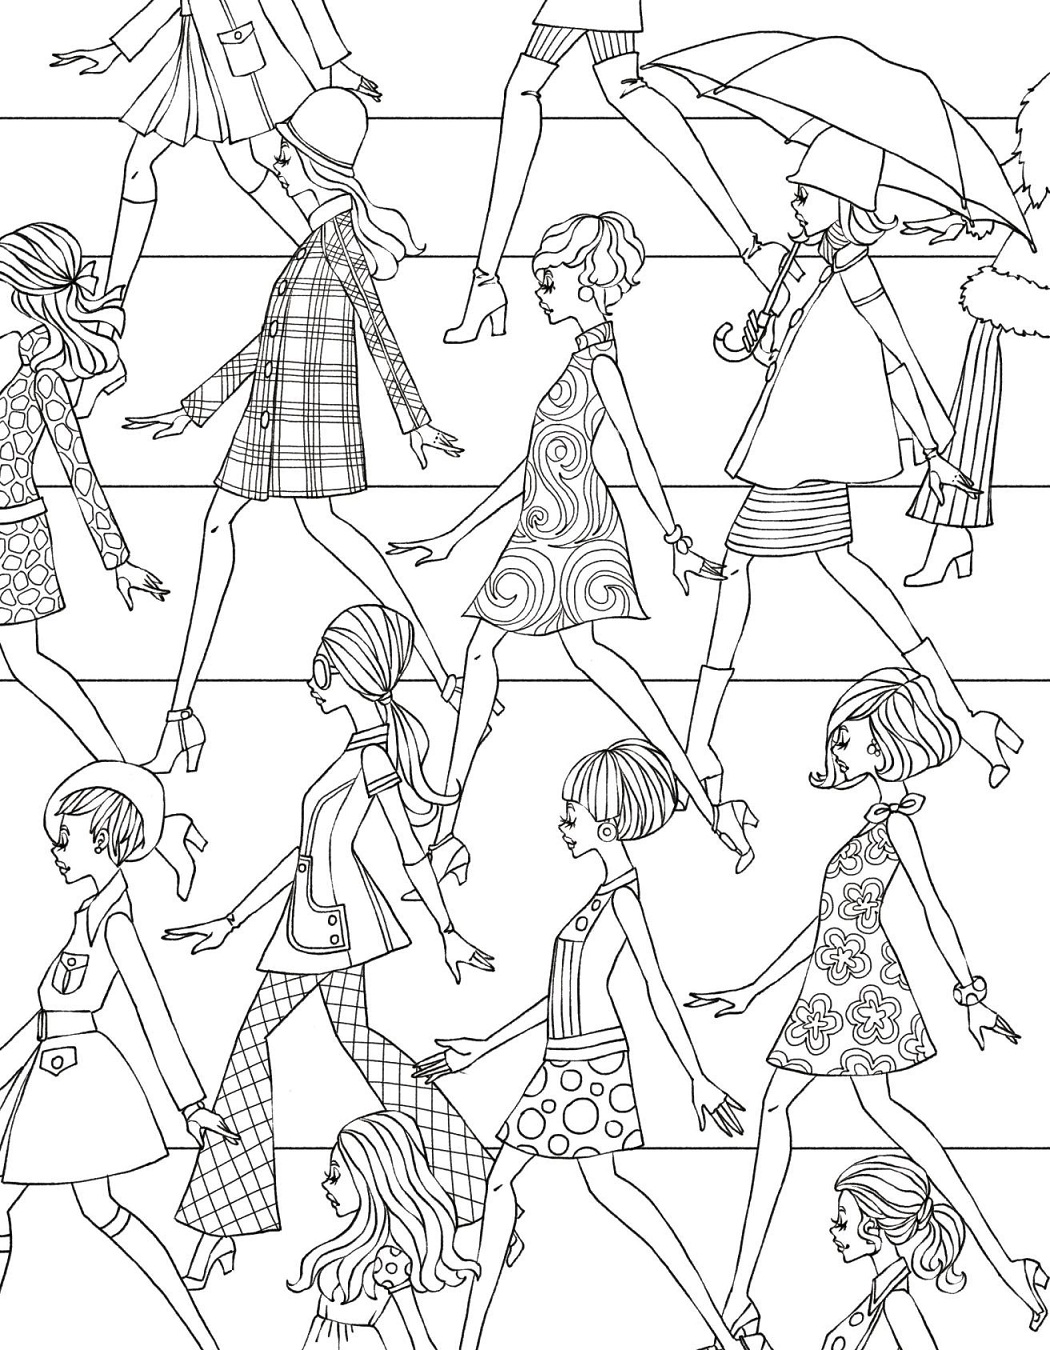 Teenagers On Street Coloring Page